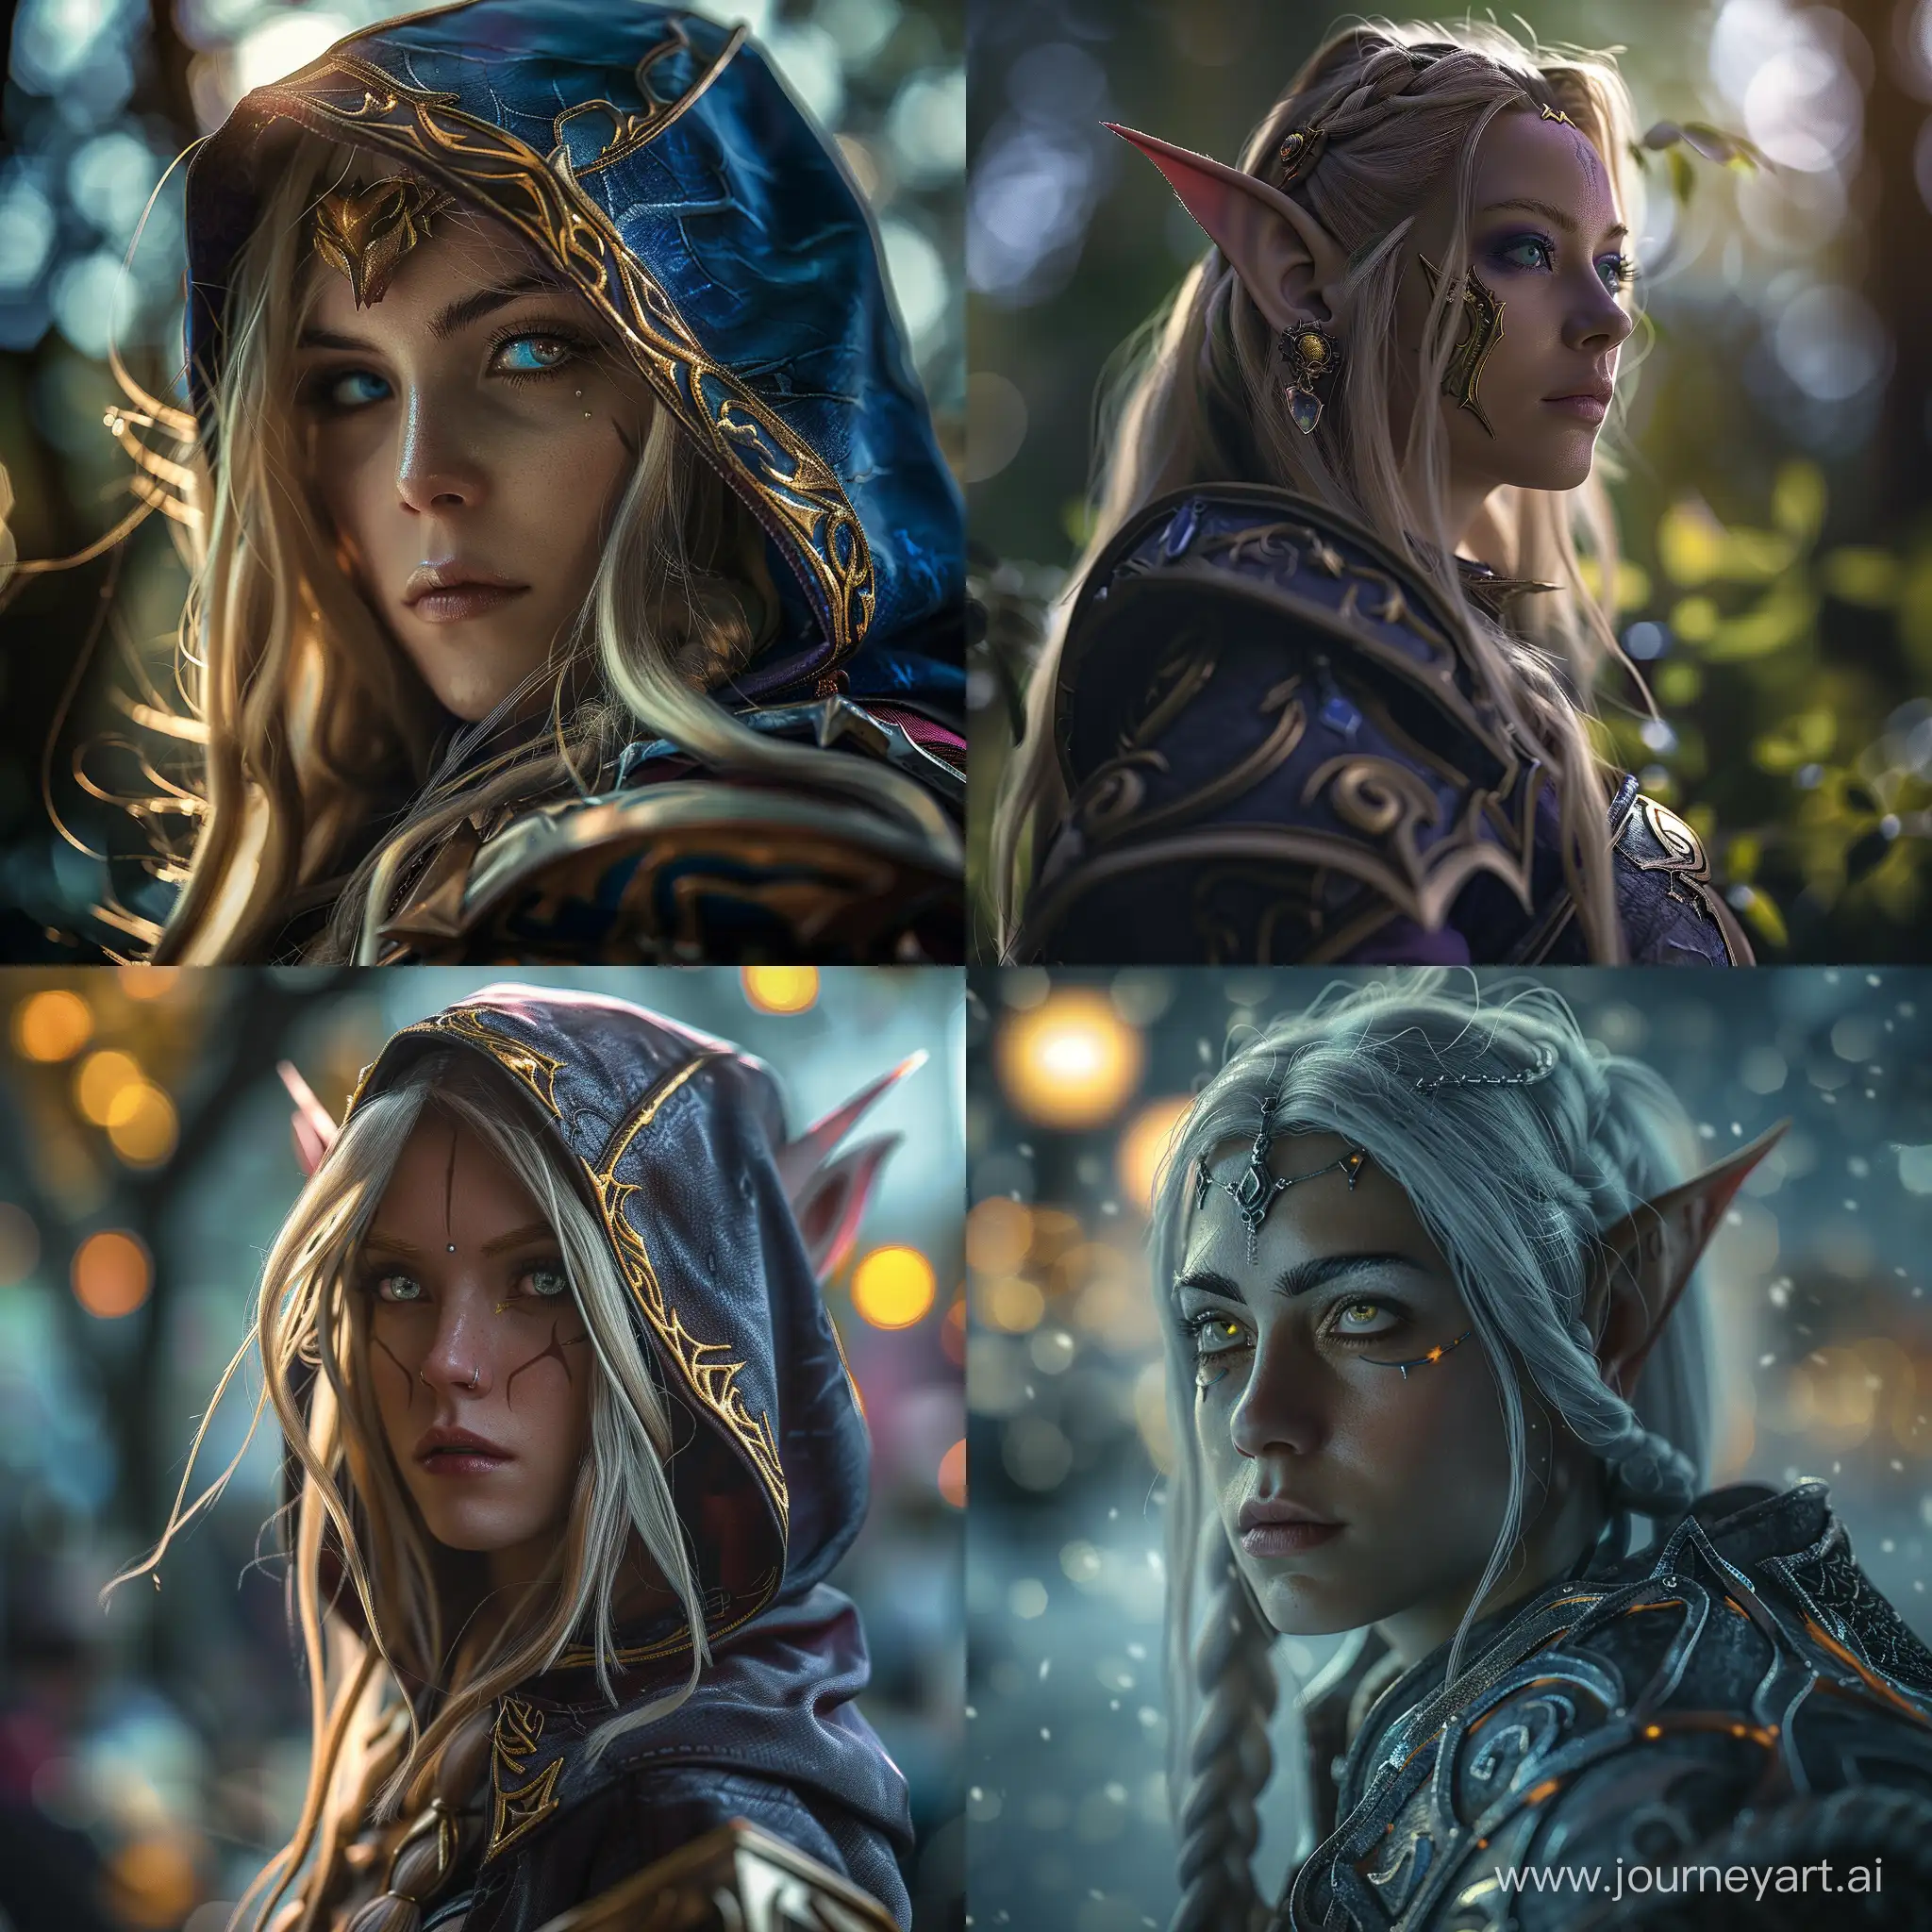 world of warcraft  Calia Menethil character, ultra realistic, hyber detailed, modelcore, portrait photo. use sony a7 II camera with an 30mm lens fat F.1.2 aperture setting to blur the background and isolate the subject. use distinctive lighting on the subjects shot. The image should be shot in ultra-high resolution. --v 6